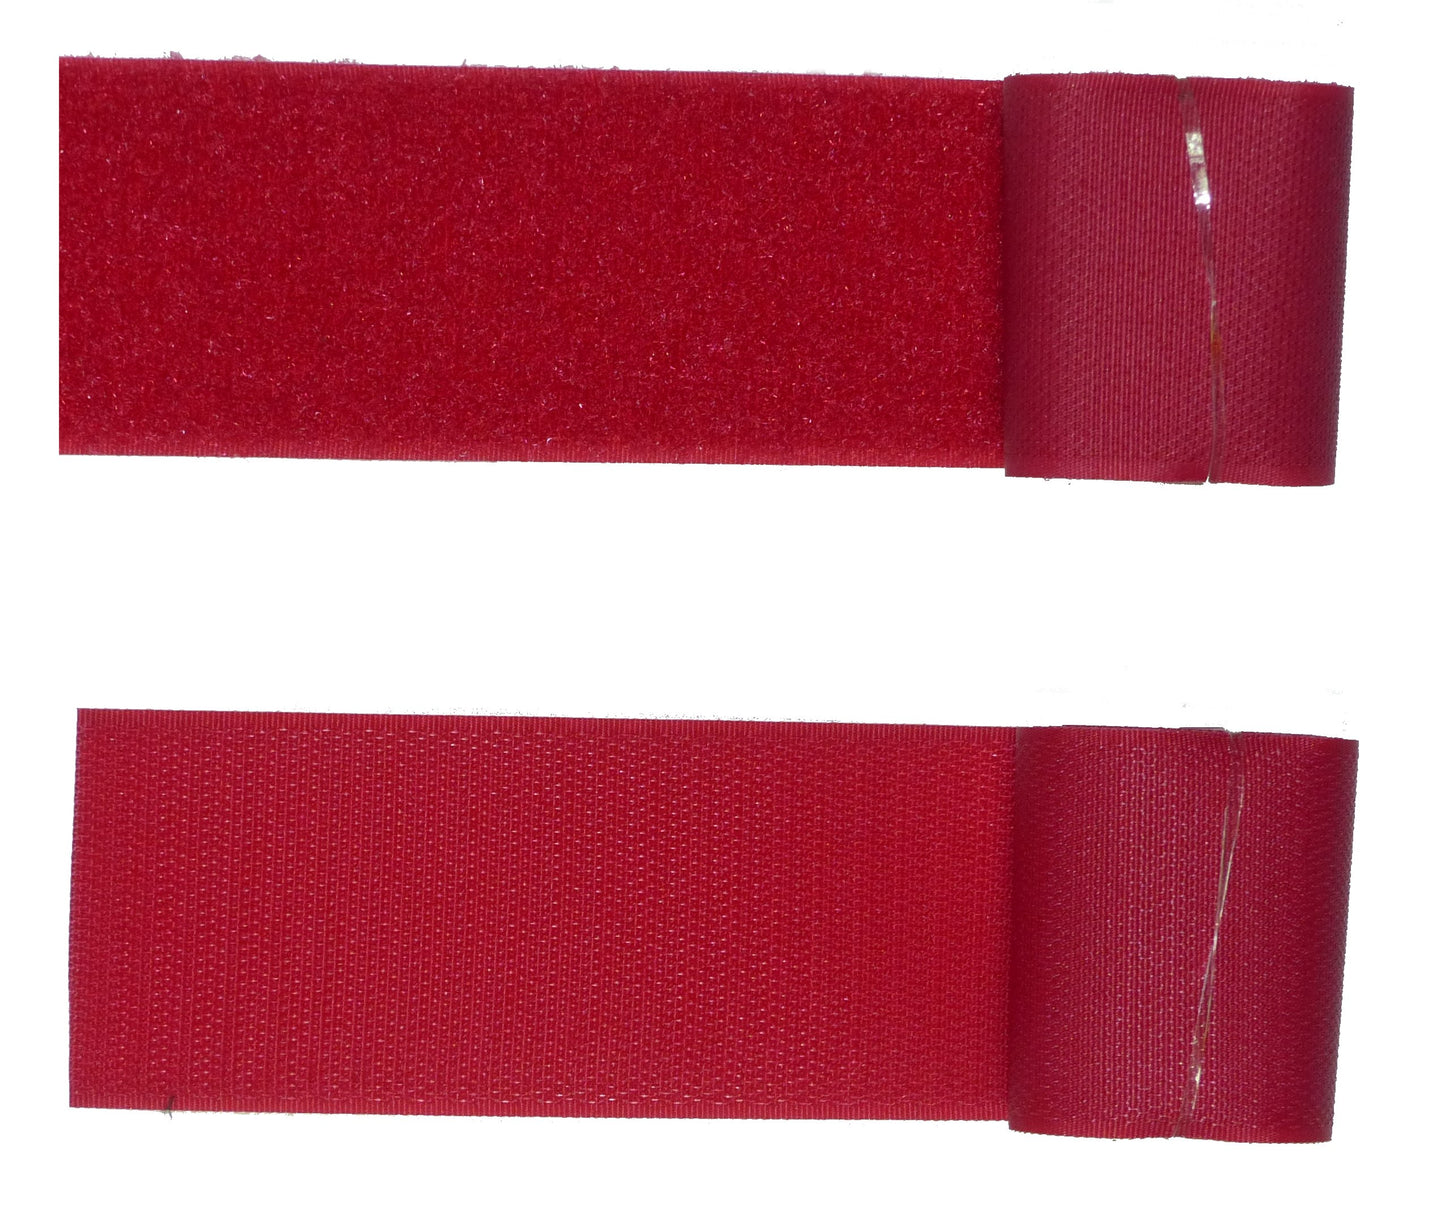 Benristraps 50mm sewable hook and loop tape in red